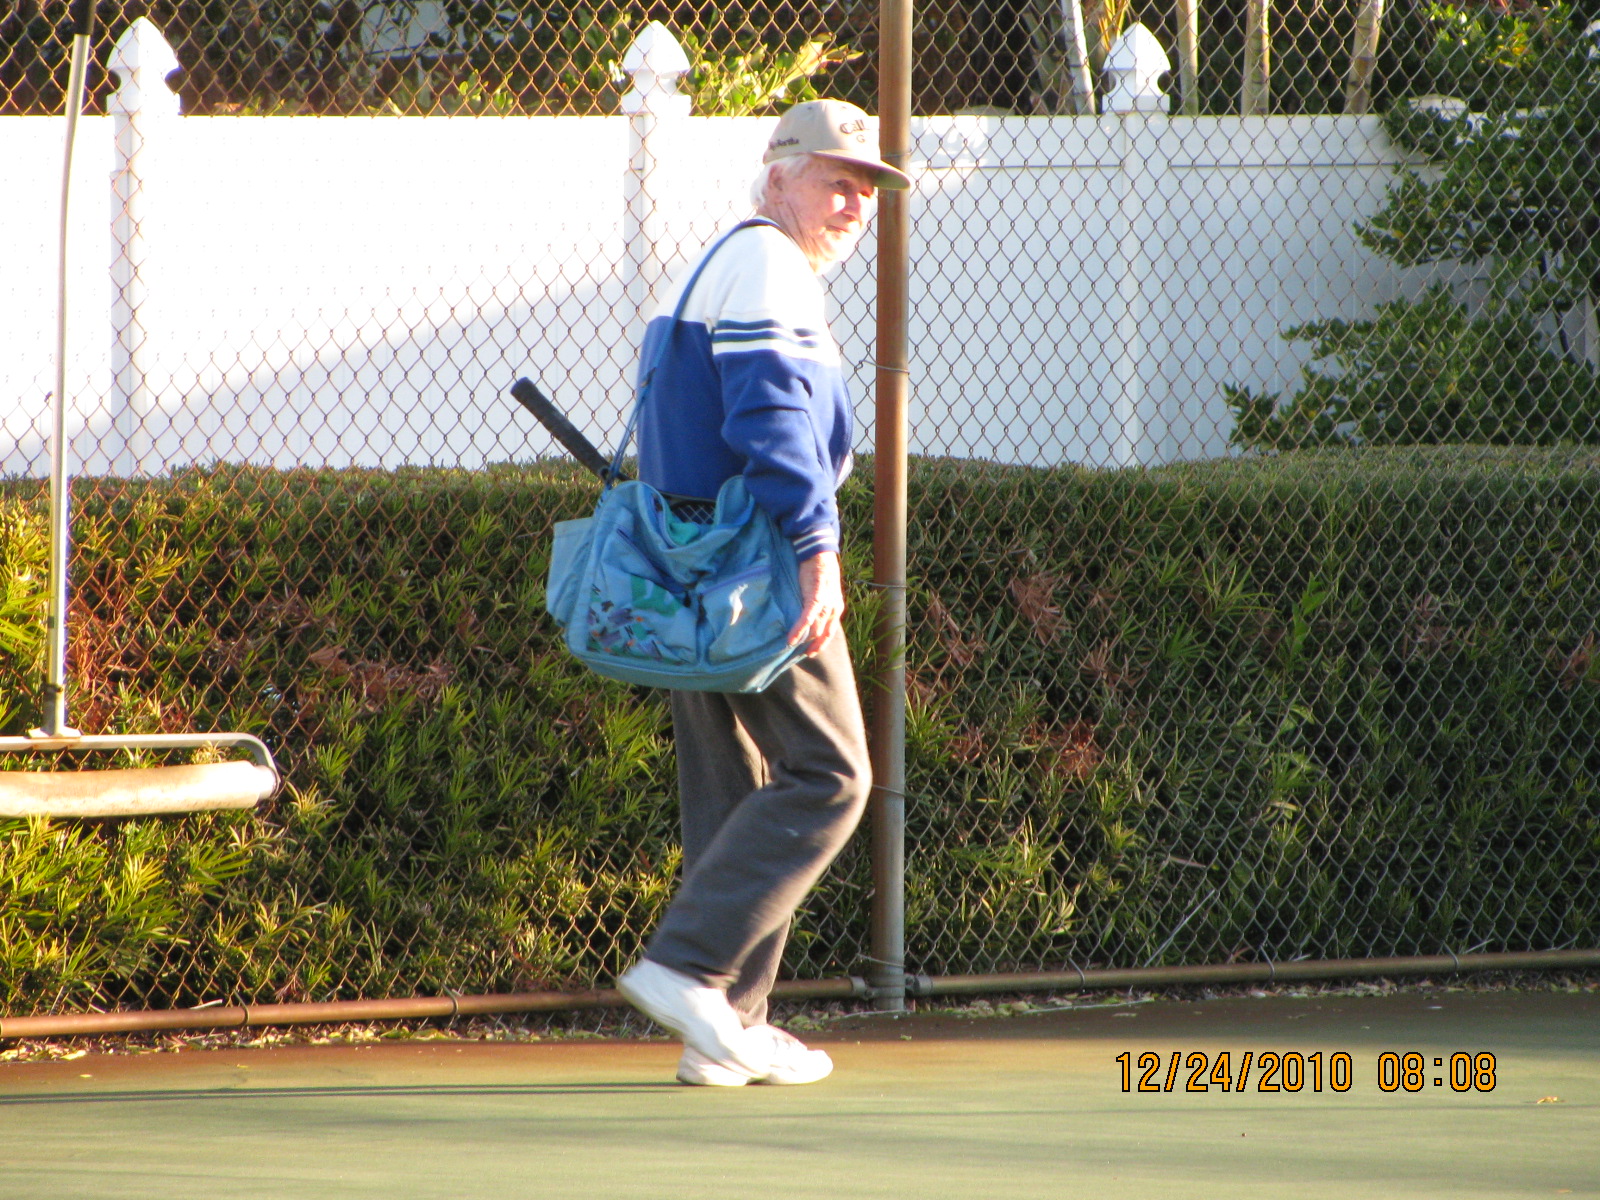 Paul at LCE courts 2010